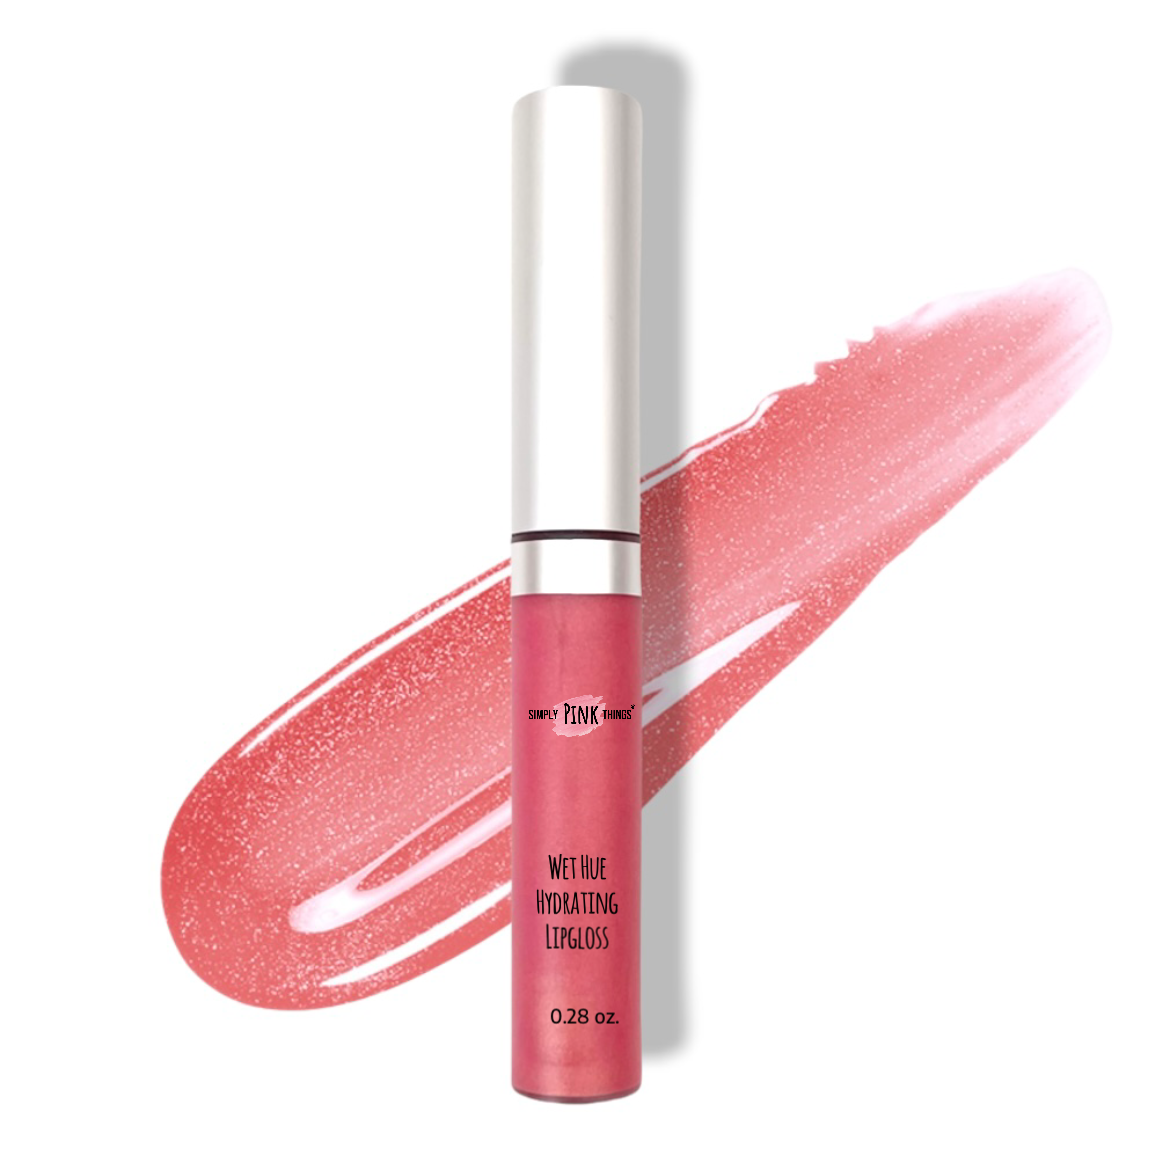 Wet Hue Hydrating Lipgloss (GORGEOUS SPRING) (8g, 0.28oz.)